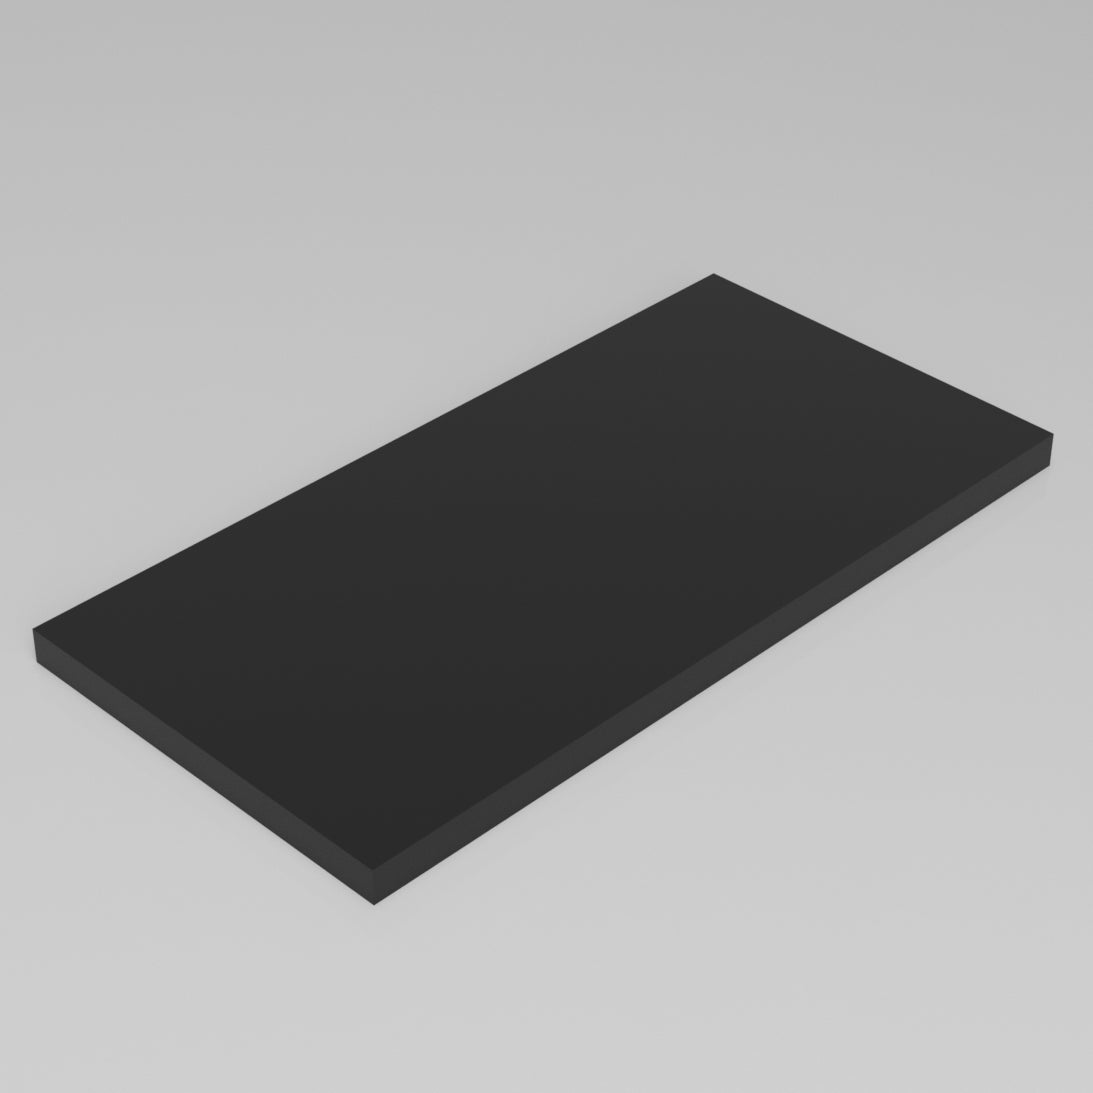 Machinable Wax Rectangular Block Front View 1 Inch by 12 Inch by 24 Inch